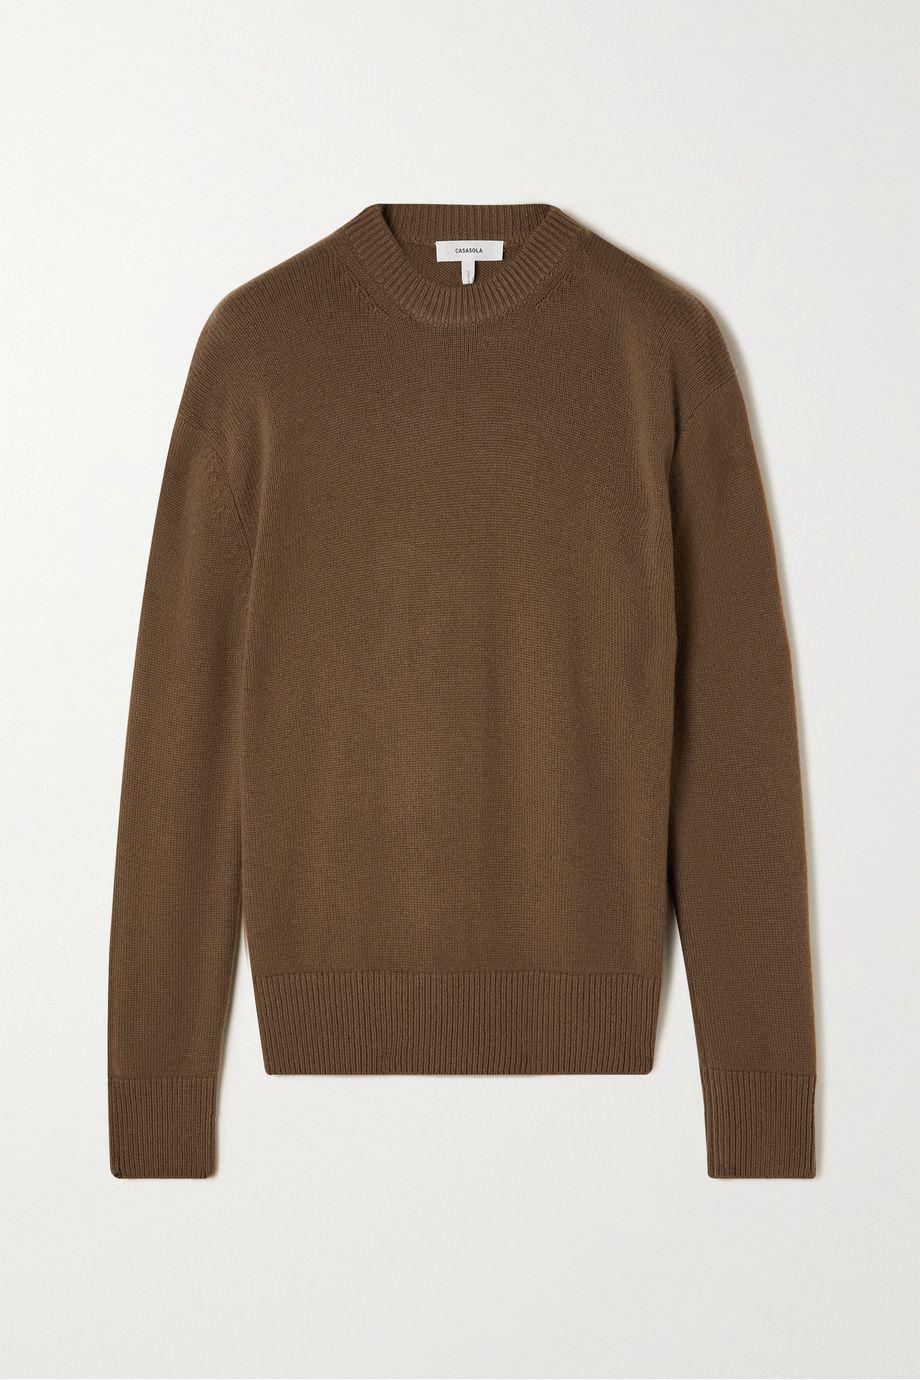 + NET SUSTAIN Vito recycled cashmere sweater by CASASOLA